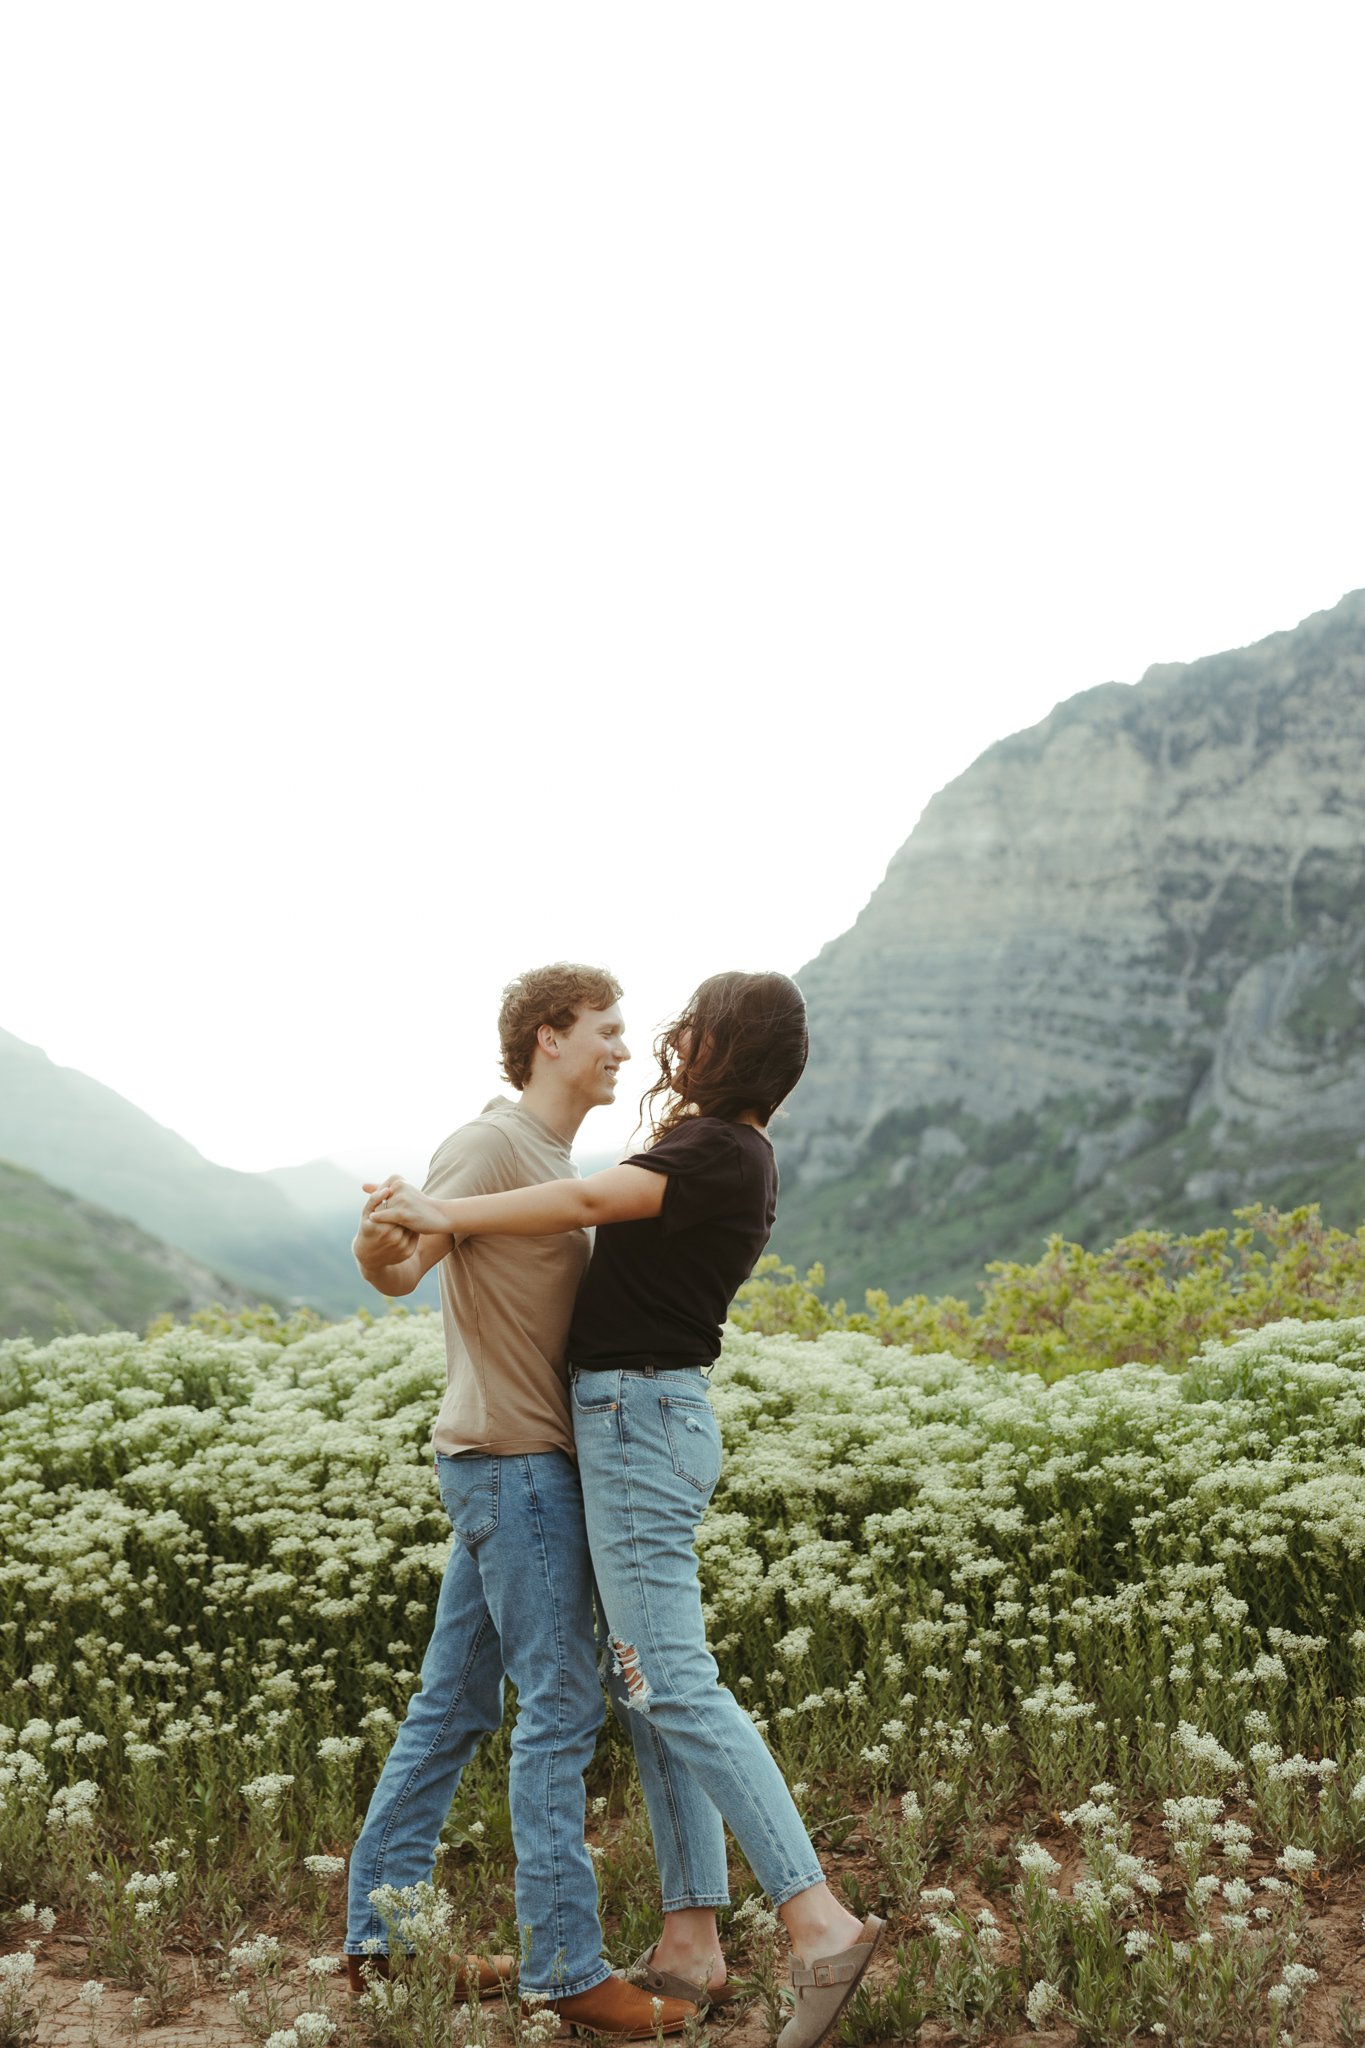 Spring-Provo-Canyon-Wildflowers-Engagement-Session-20